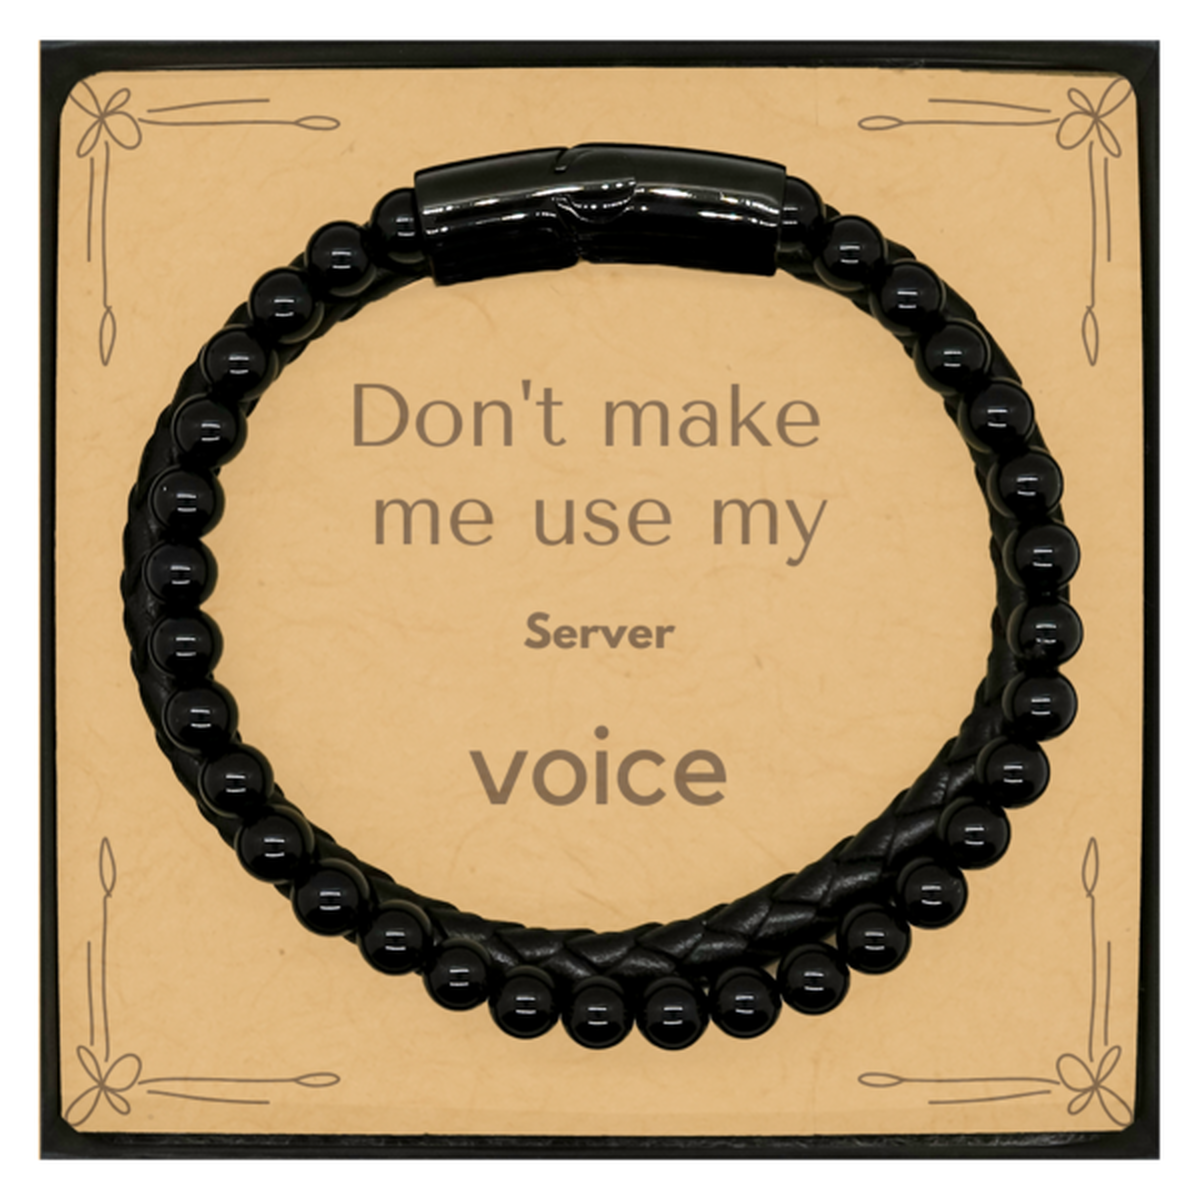 Don't make me use my Server voice, Sarcasm Server Card Gifts, Christmas Server Stone Leather Bracelets Birthday Unique Gifts For Server Coworkers, Men, Women, Colleague, Friends